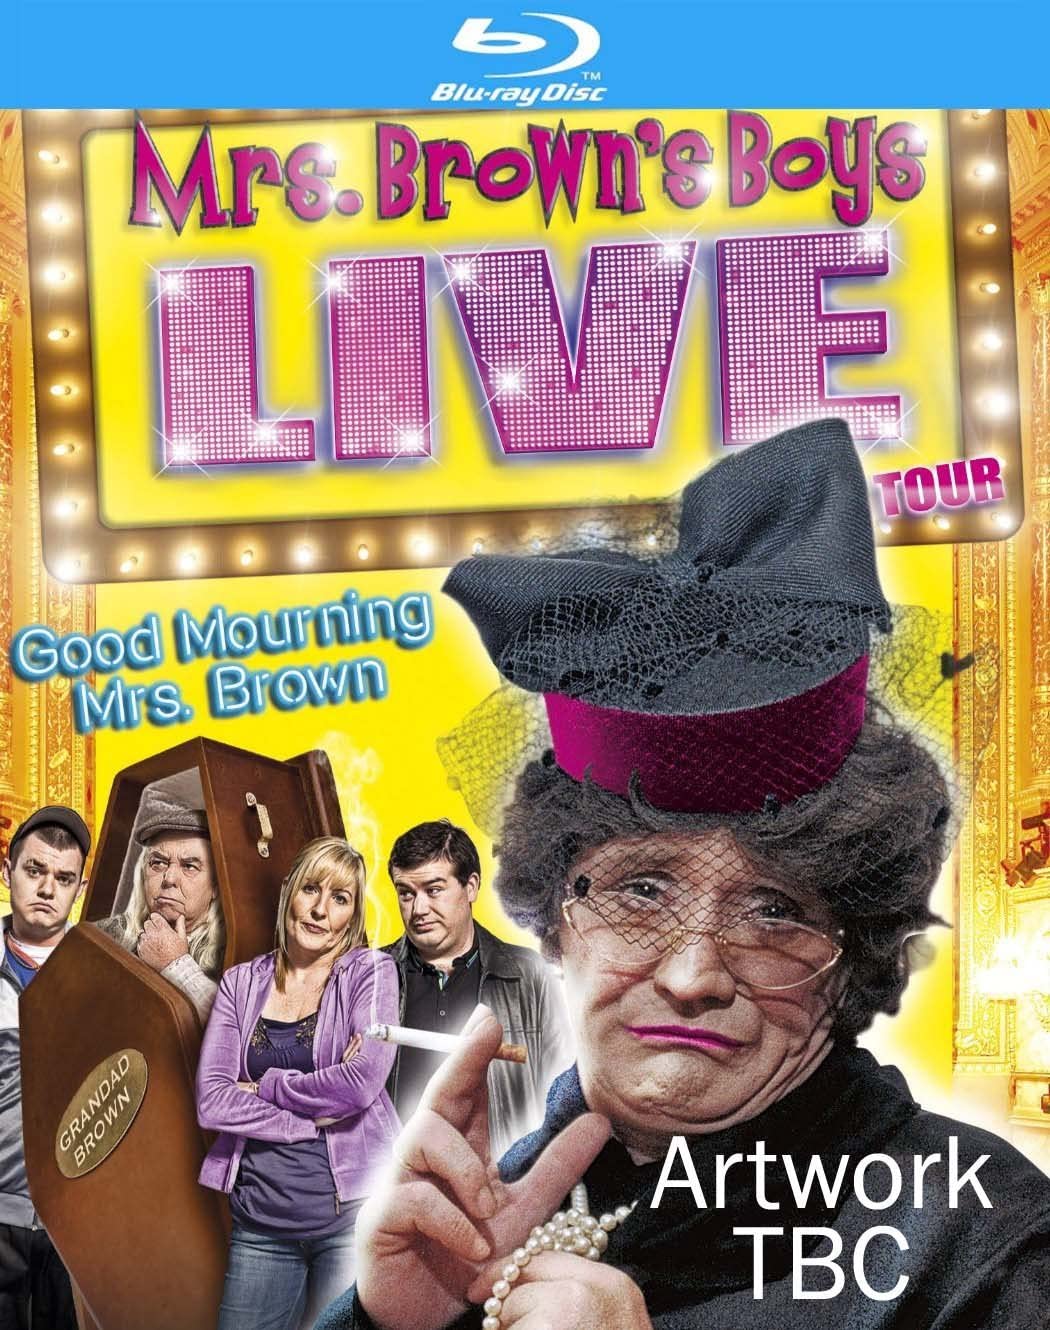 Mrs. Brown&#39;s Boys Live Tour: Good Mourning Mrs. Brown [Blu-ray]